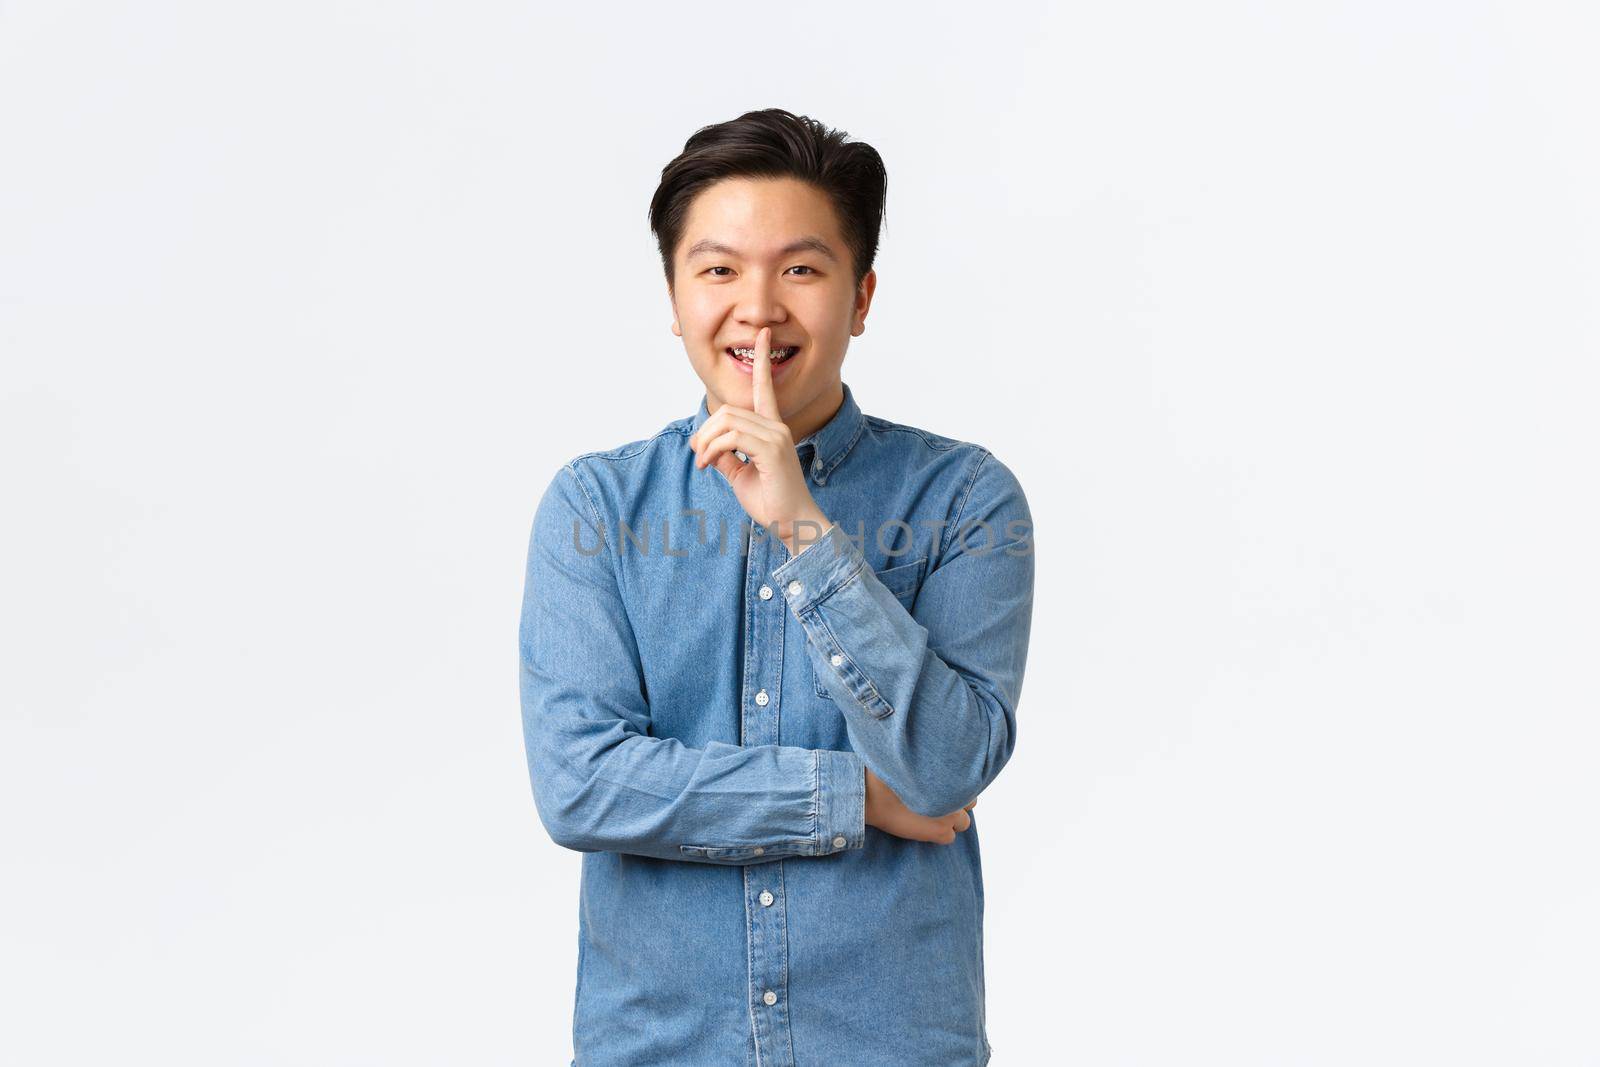 Smiling cunning asian man preparing surprise, asking keep quiet, shushing or hushing at person, press index finger to lips, promise not tell, gossiping over white background, whispering.